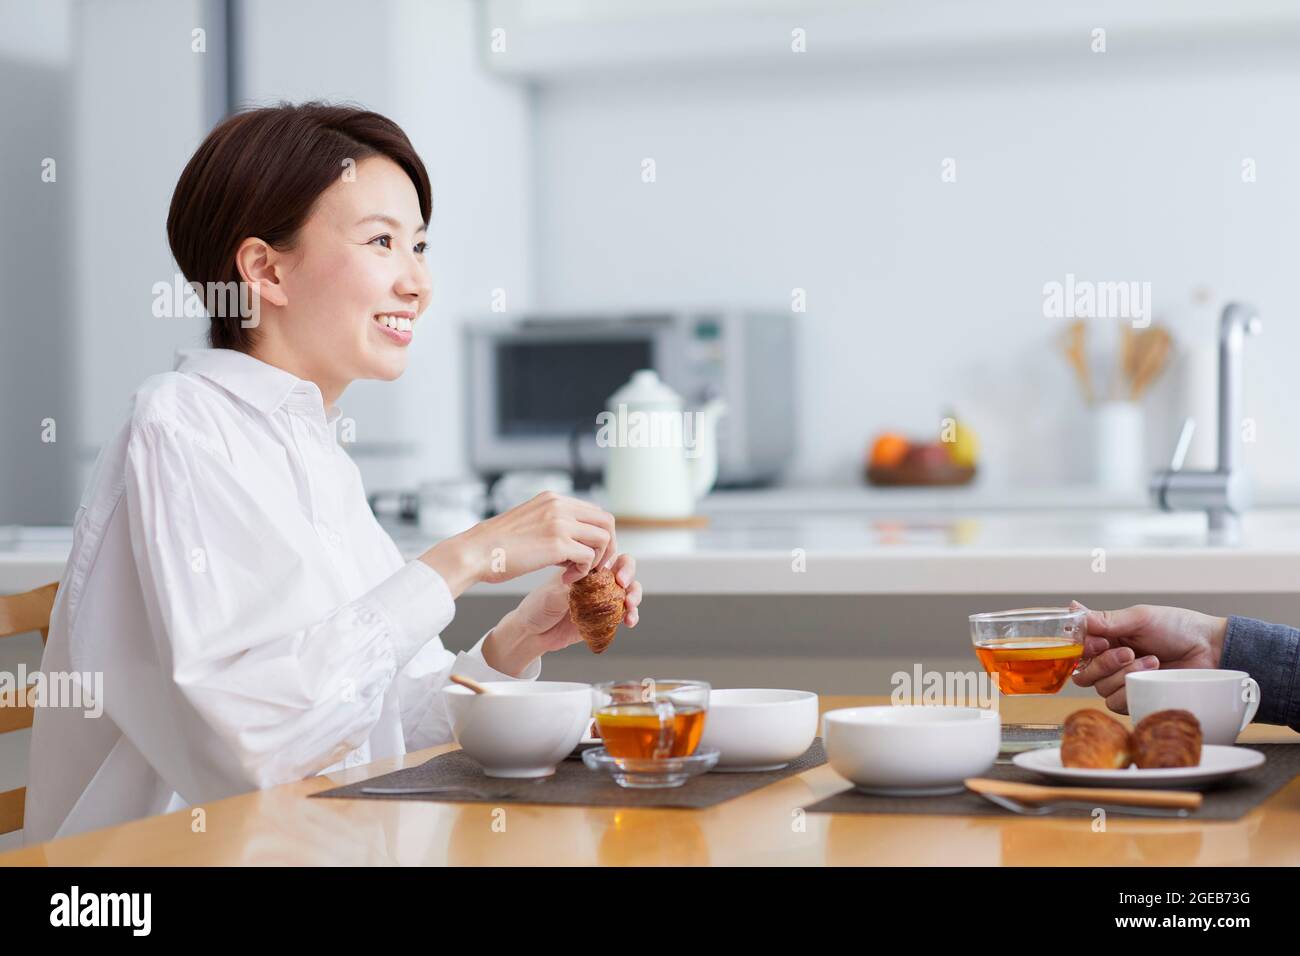 Japanese woman eating at home Stock Photo